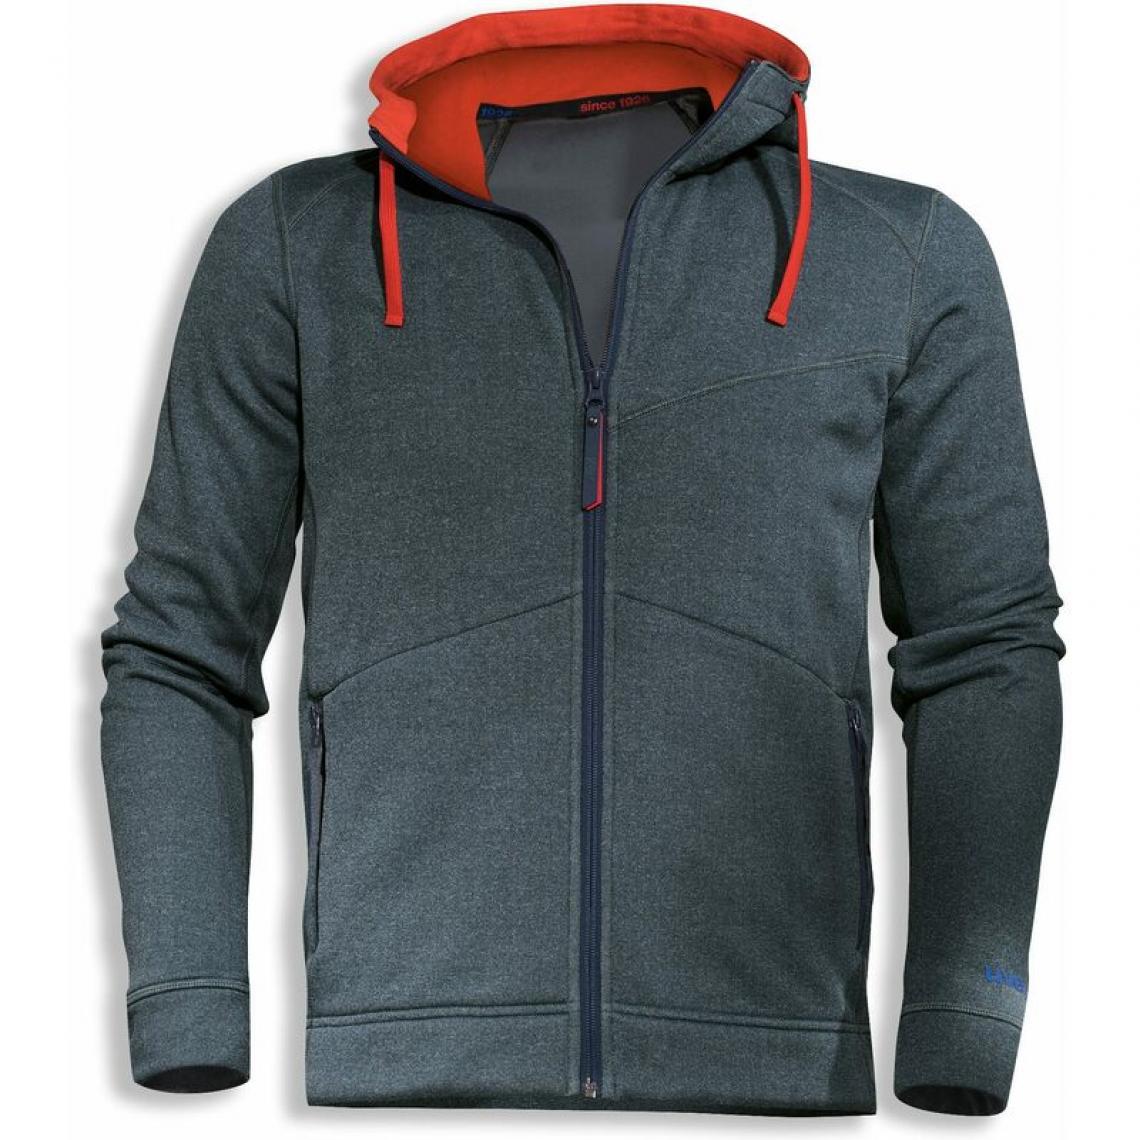 Uvex - uvex Veste Street Hoody suXXeed, 3XL, bleu nuit () - Protections corps